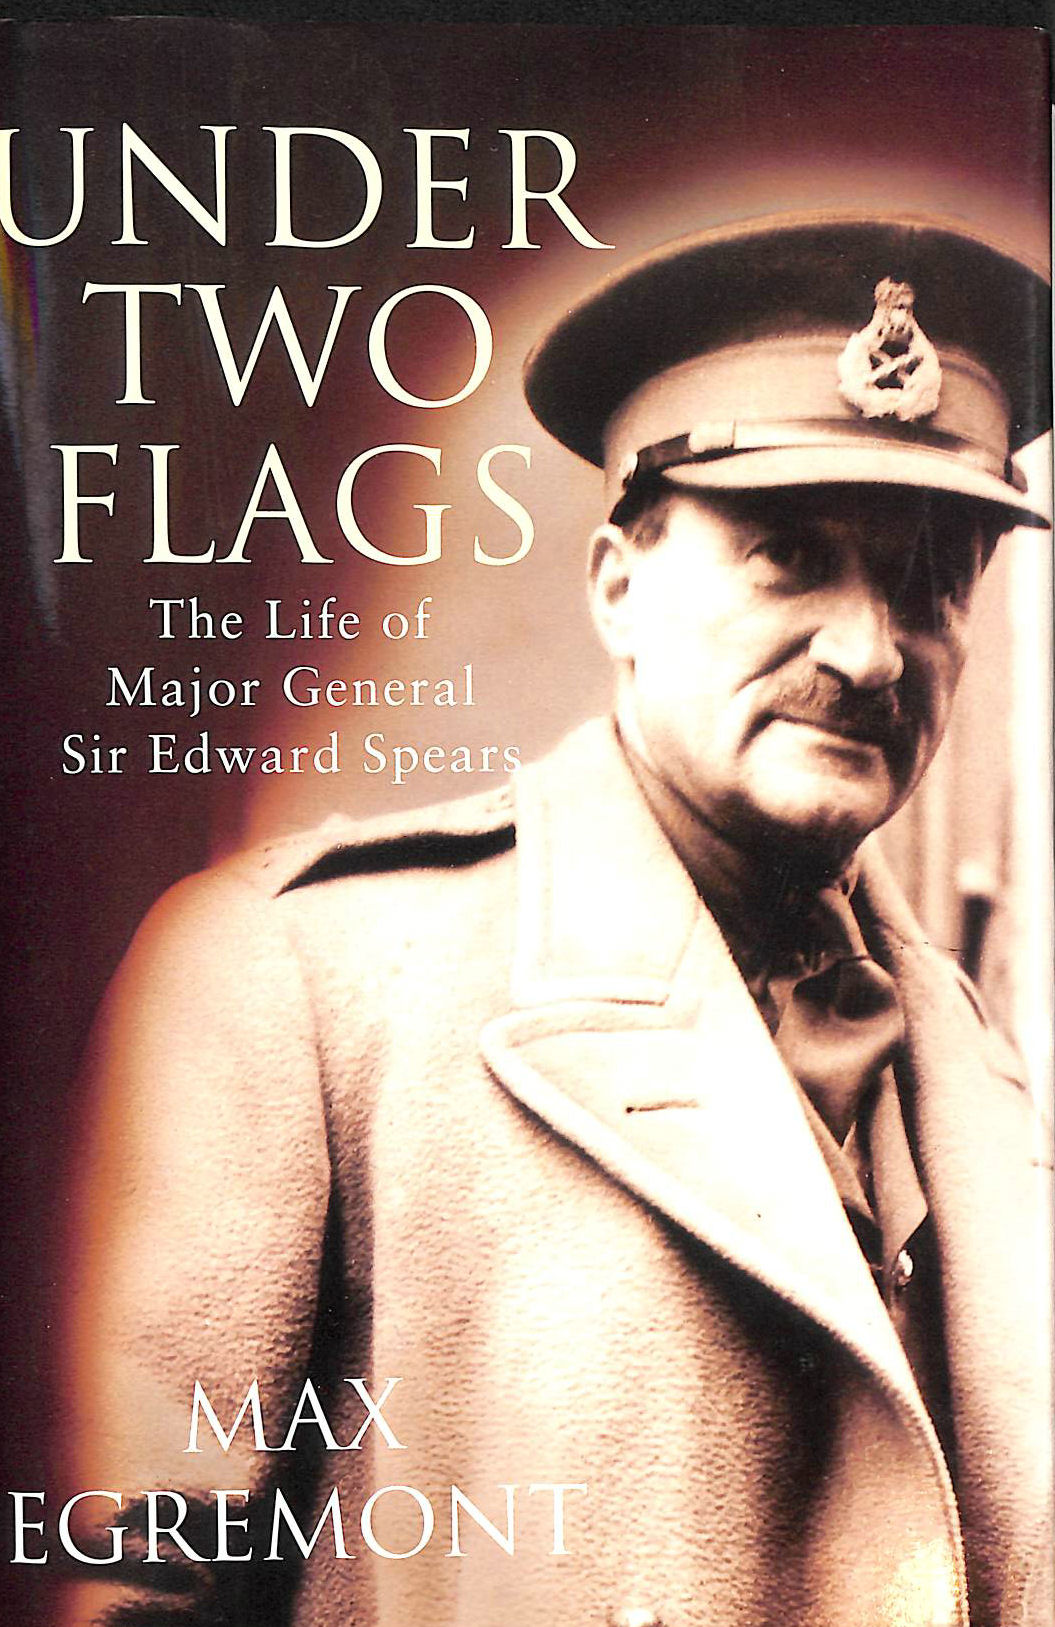 EGREMONT, MAX - Under Two Flags: Life Of General Sir Edward Spears: Life of Major General Sir Edward Spears